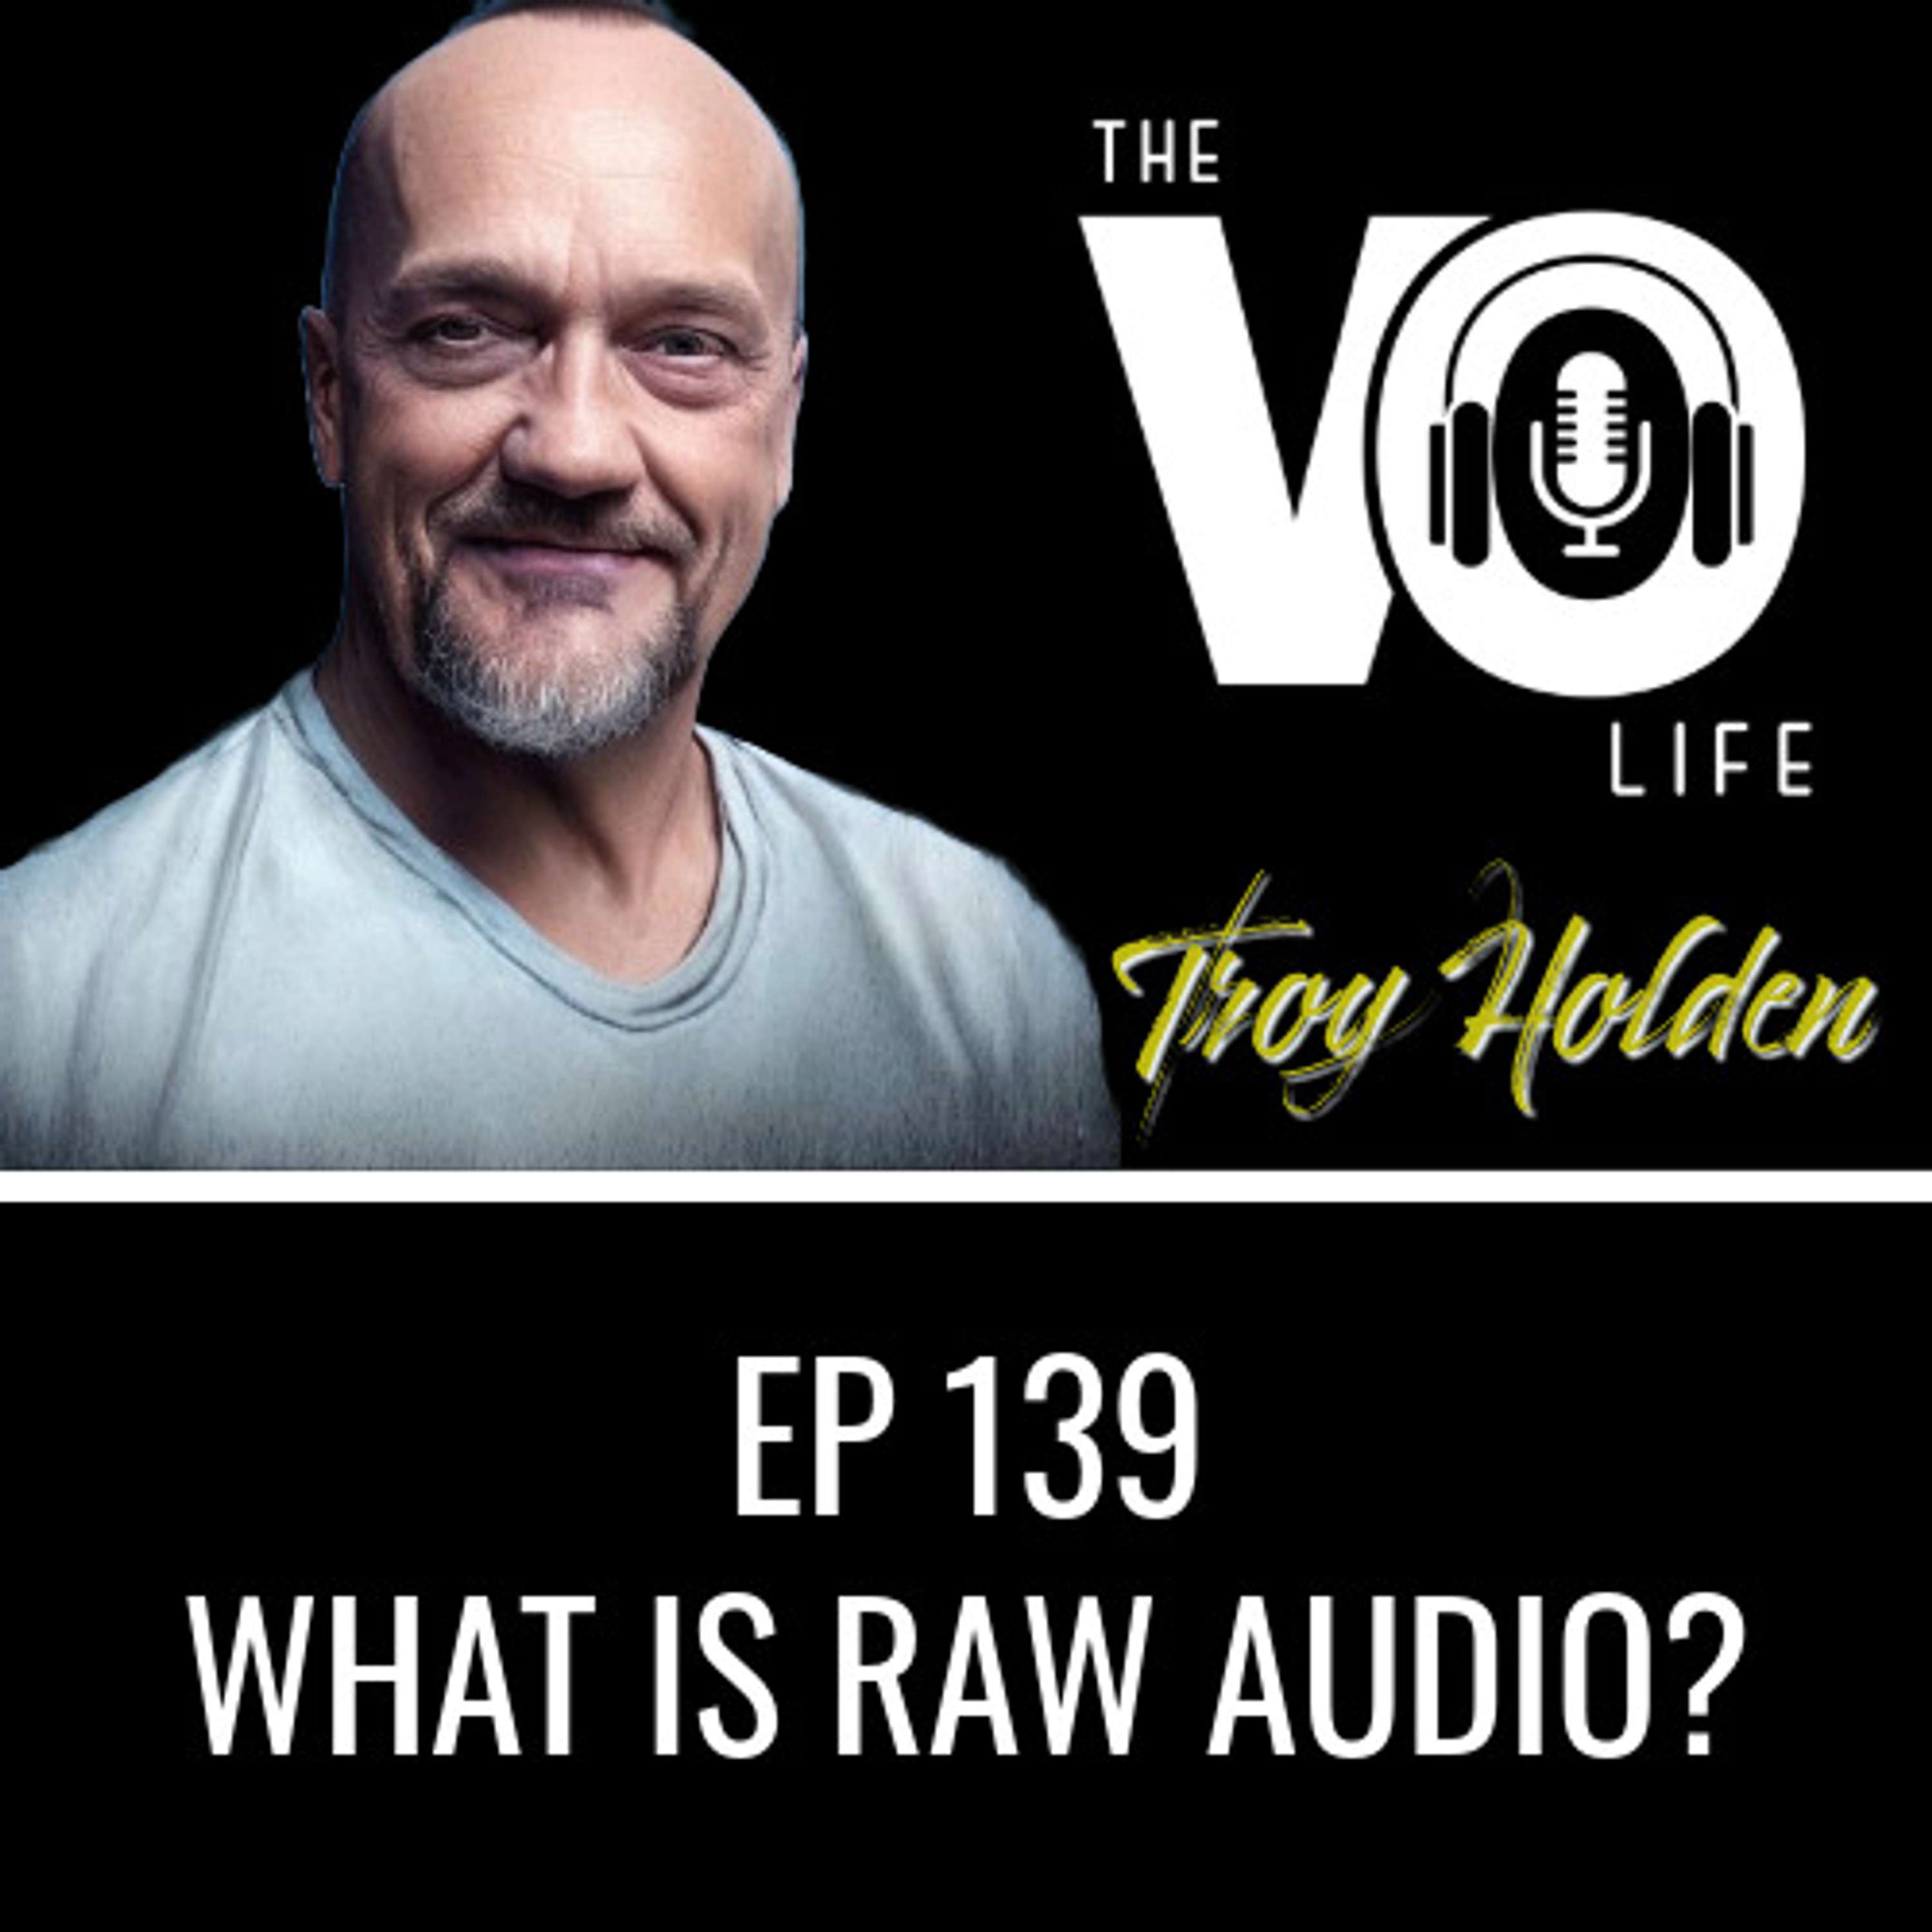 Ep 139 - What is RAW AUDIO?